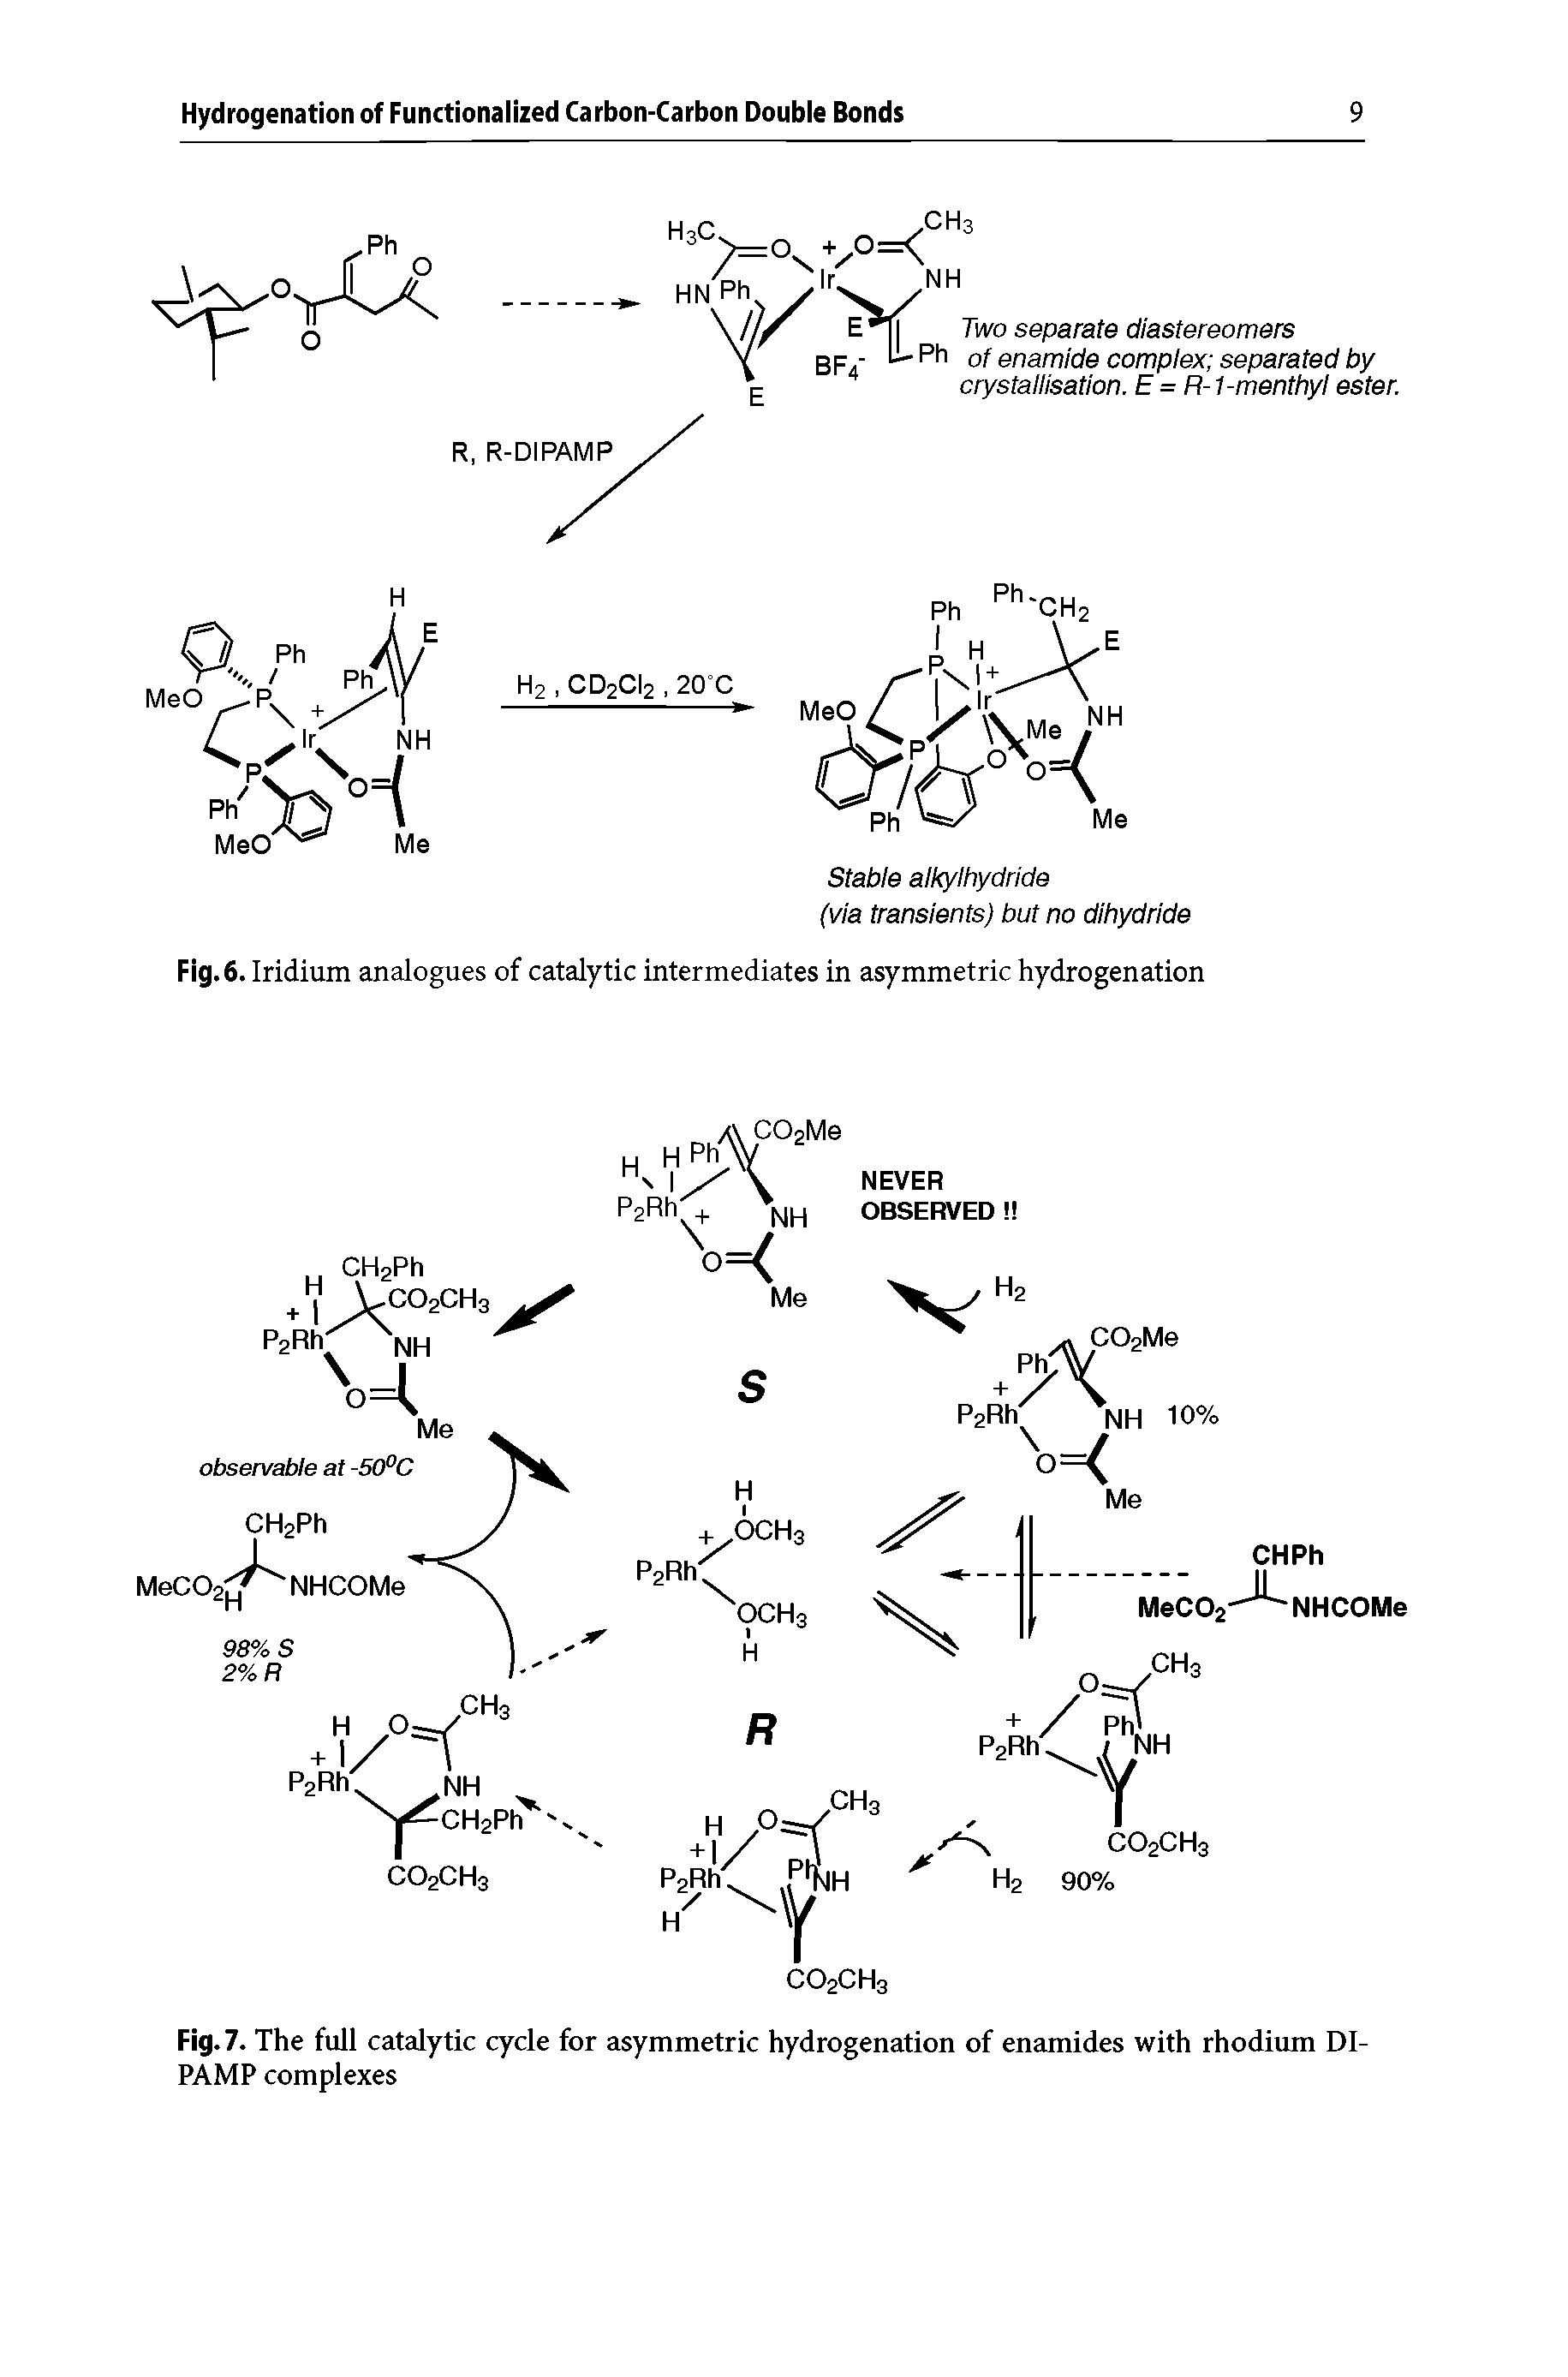 Fig. 7. The full catalytic cycle for asymmetric hydrogenation of enamides with rhodium DI-PAMP complexes...